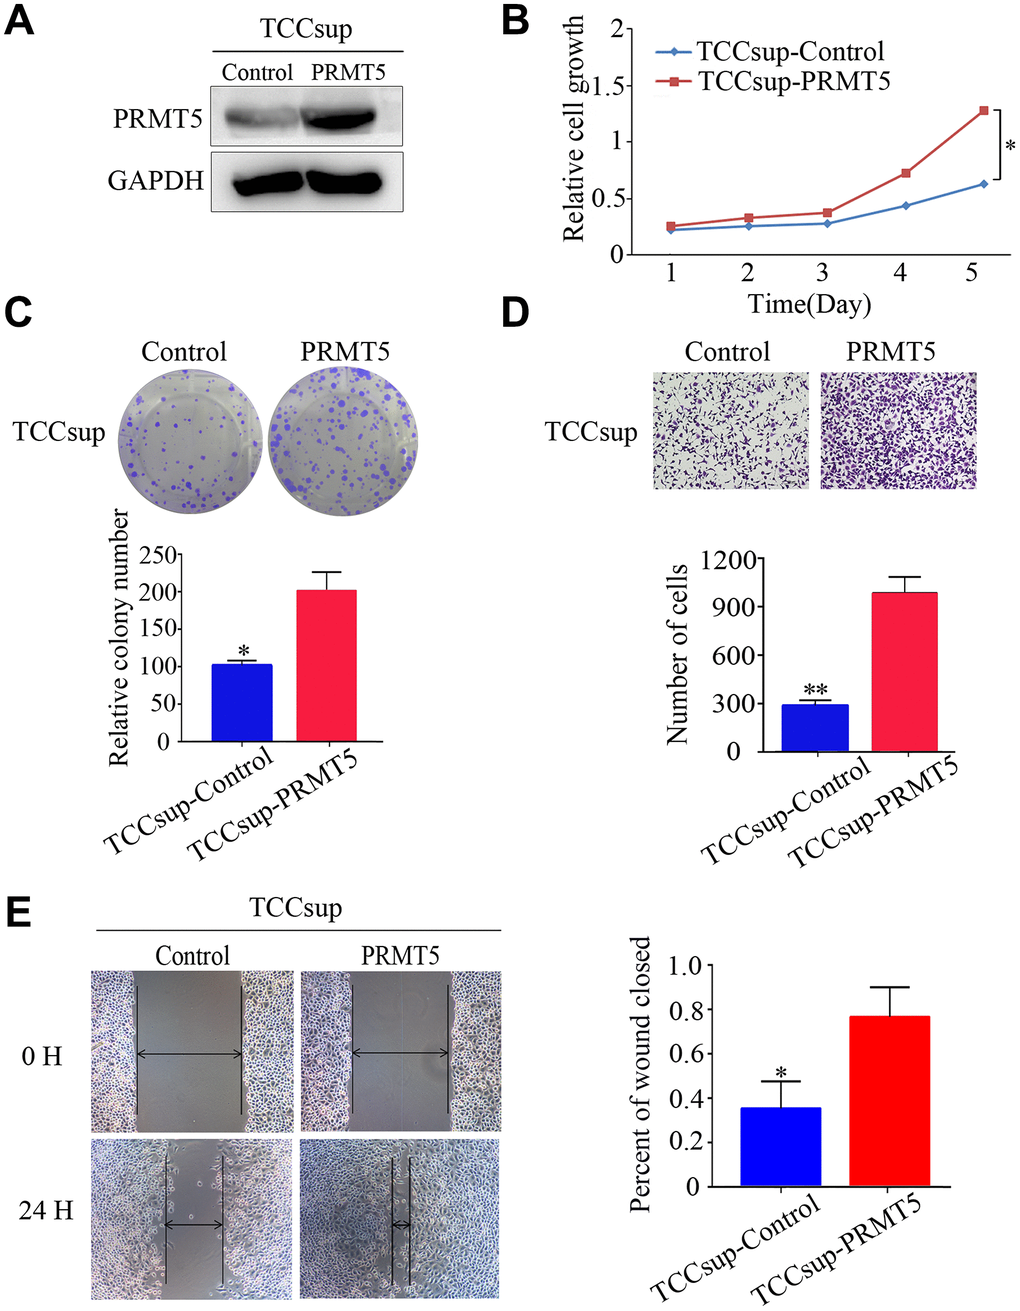 Upregulated expression of PRMT5 promoted the proliferation and aggressiveness of bladder cancer cells. (A) Western blotting showed successful overexpression of PRMT5 in TCCsup cells. (B, C) Cell proliferation was promoted by the CCK-8 assay and the colony formation assay. (D, E) Cell invasion and migration of bladder cancer cells were detected using the transwell assay and the wound-healing assay. Error bars show the standard error of the mean. *P P 